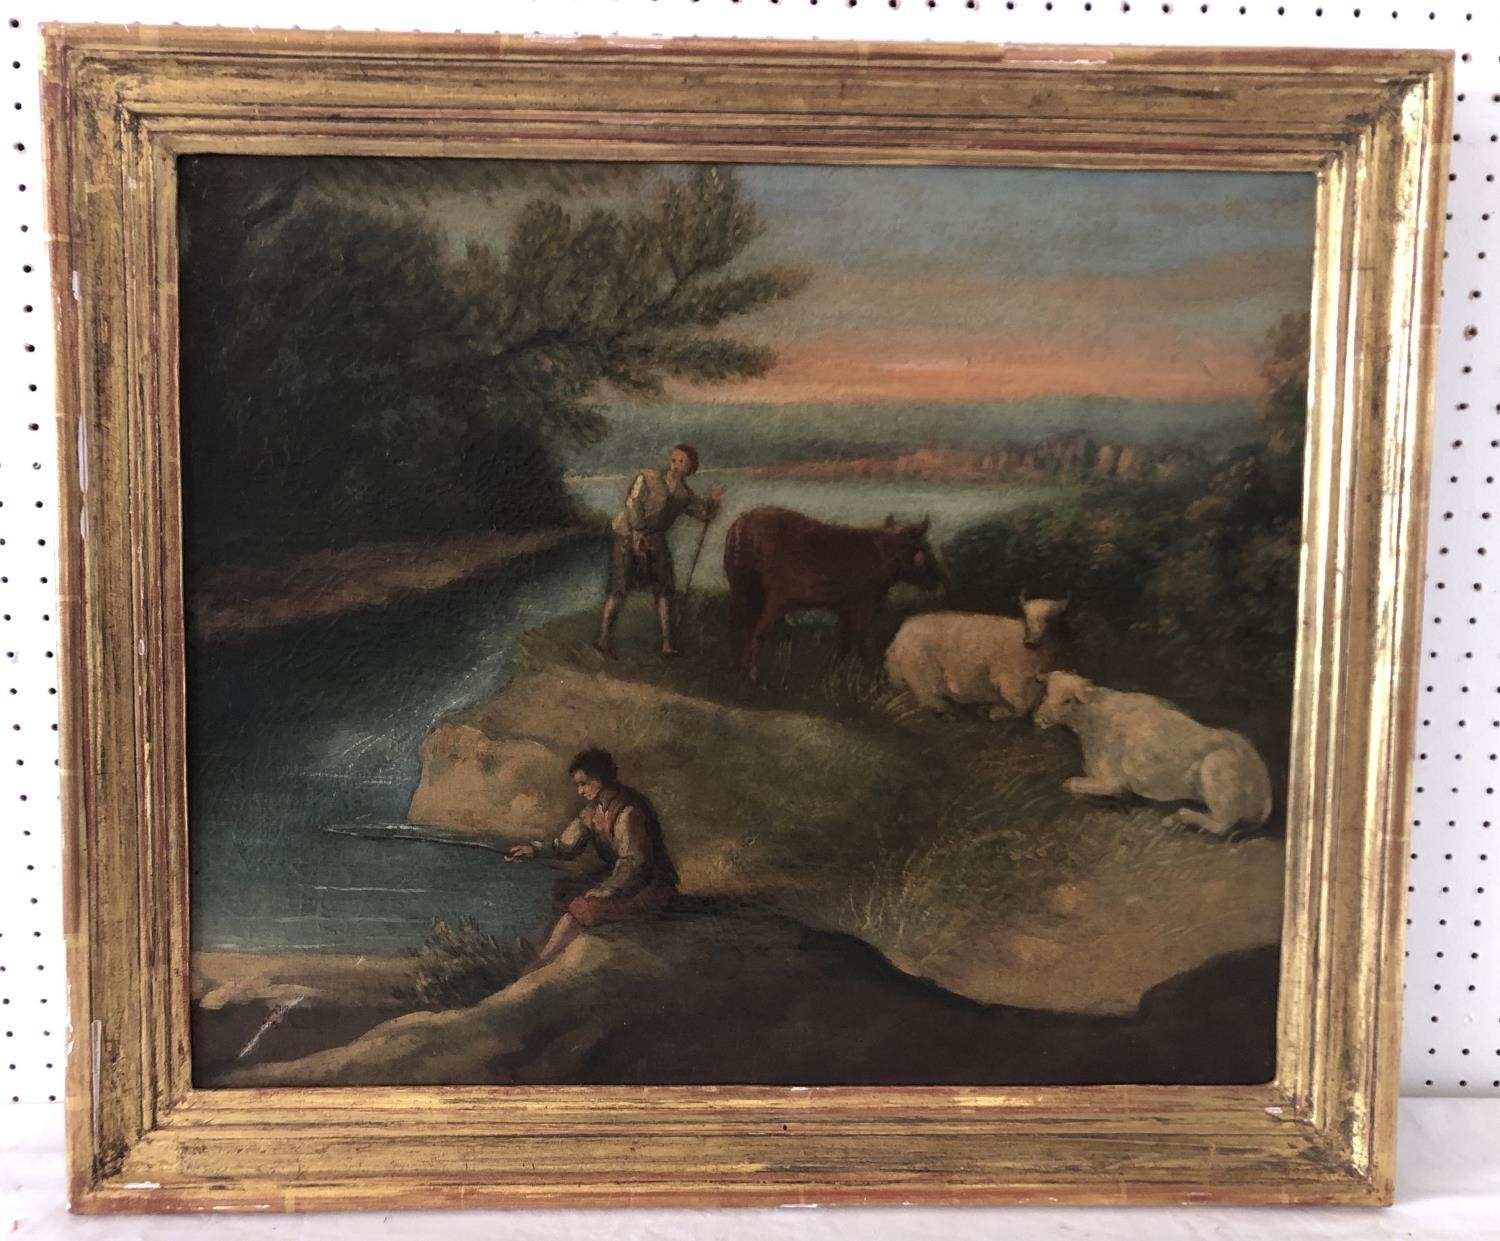 Dutch School, 18th Century - Pastoral landscape with figures and cattle, unsigned, oil on canvas, 45